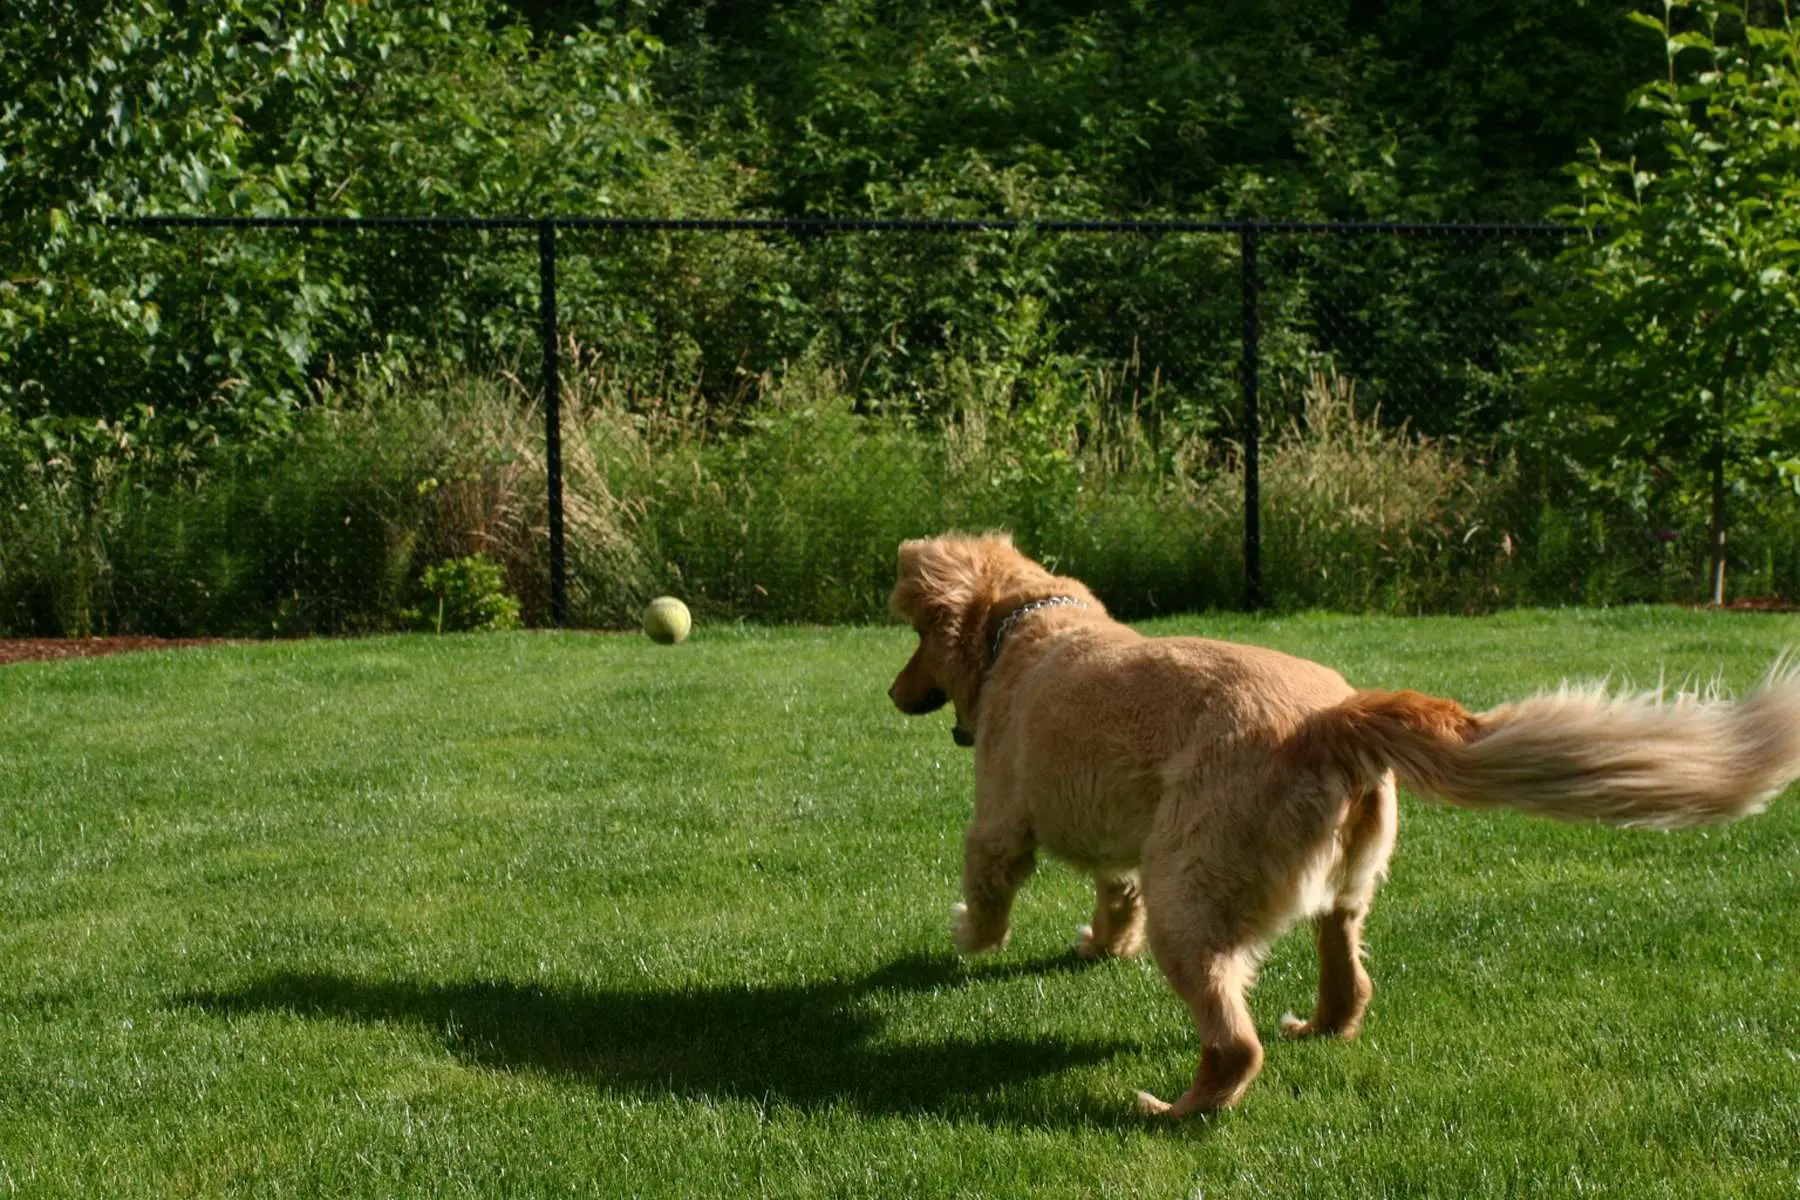 A dog chasing a ball in the grass.